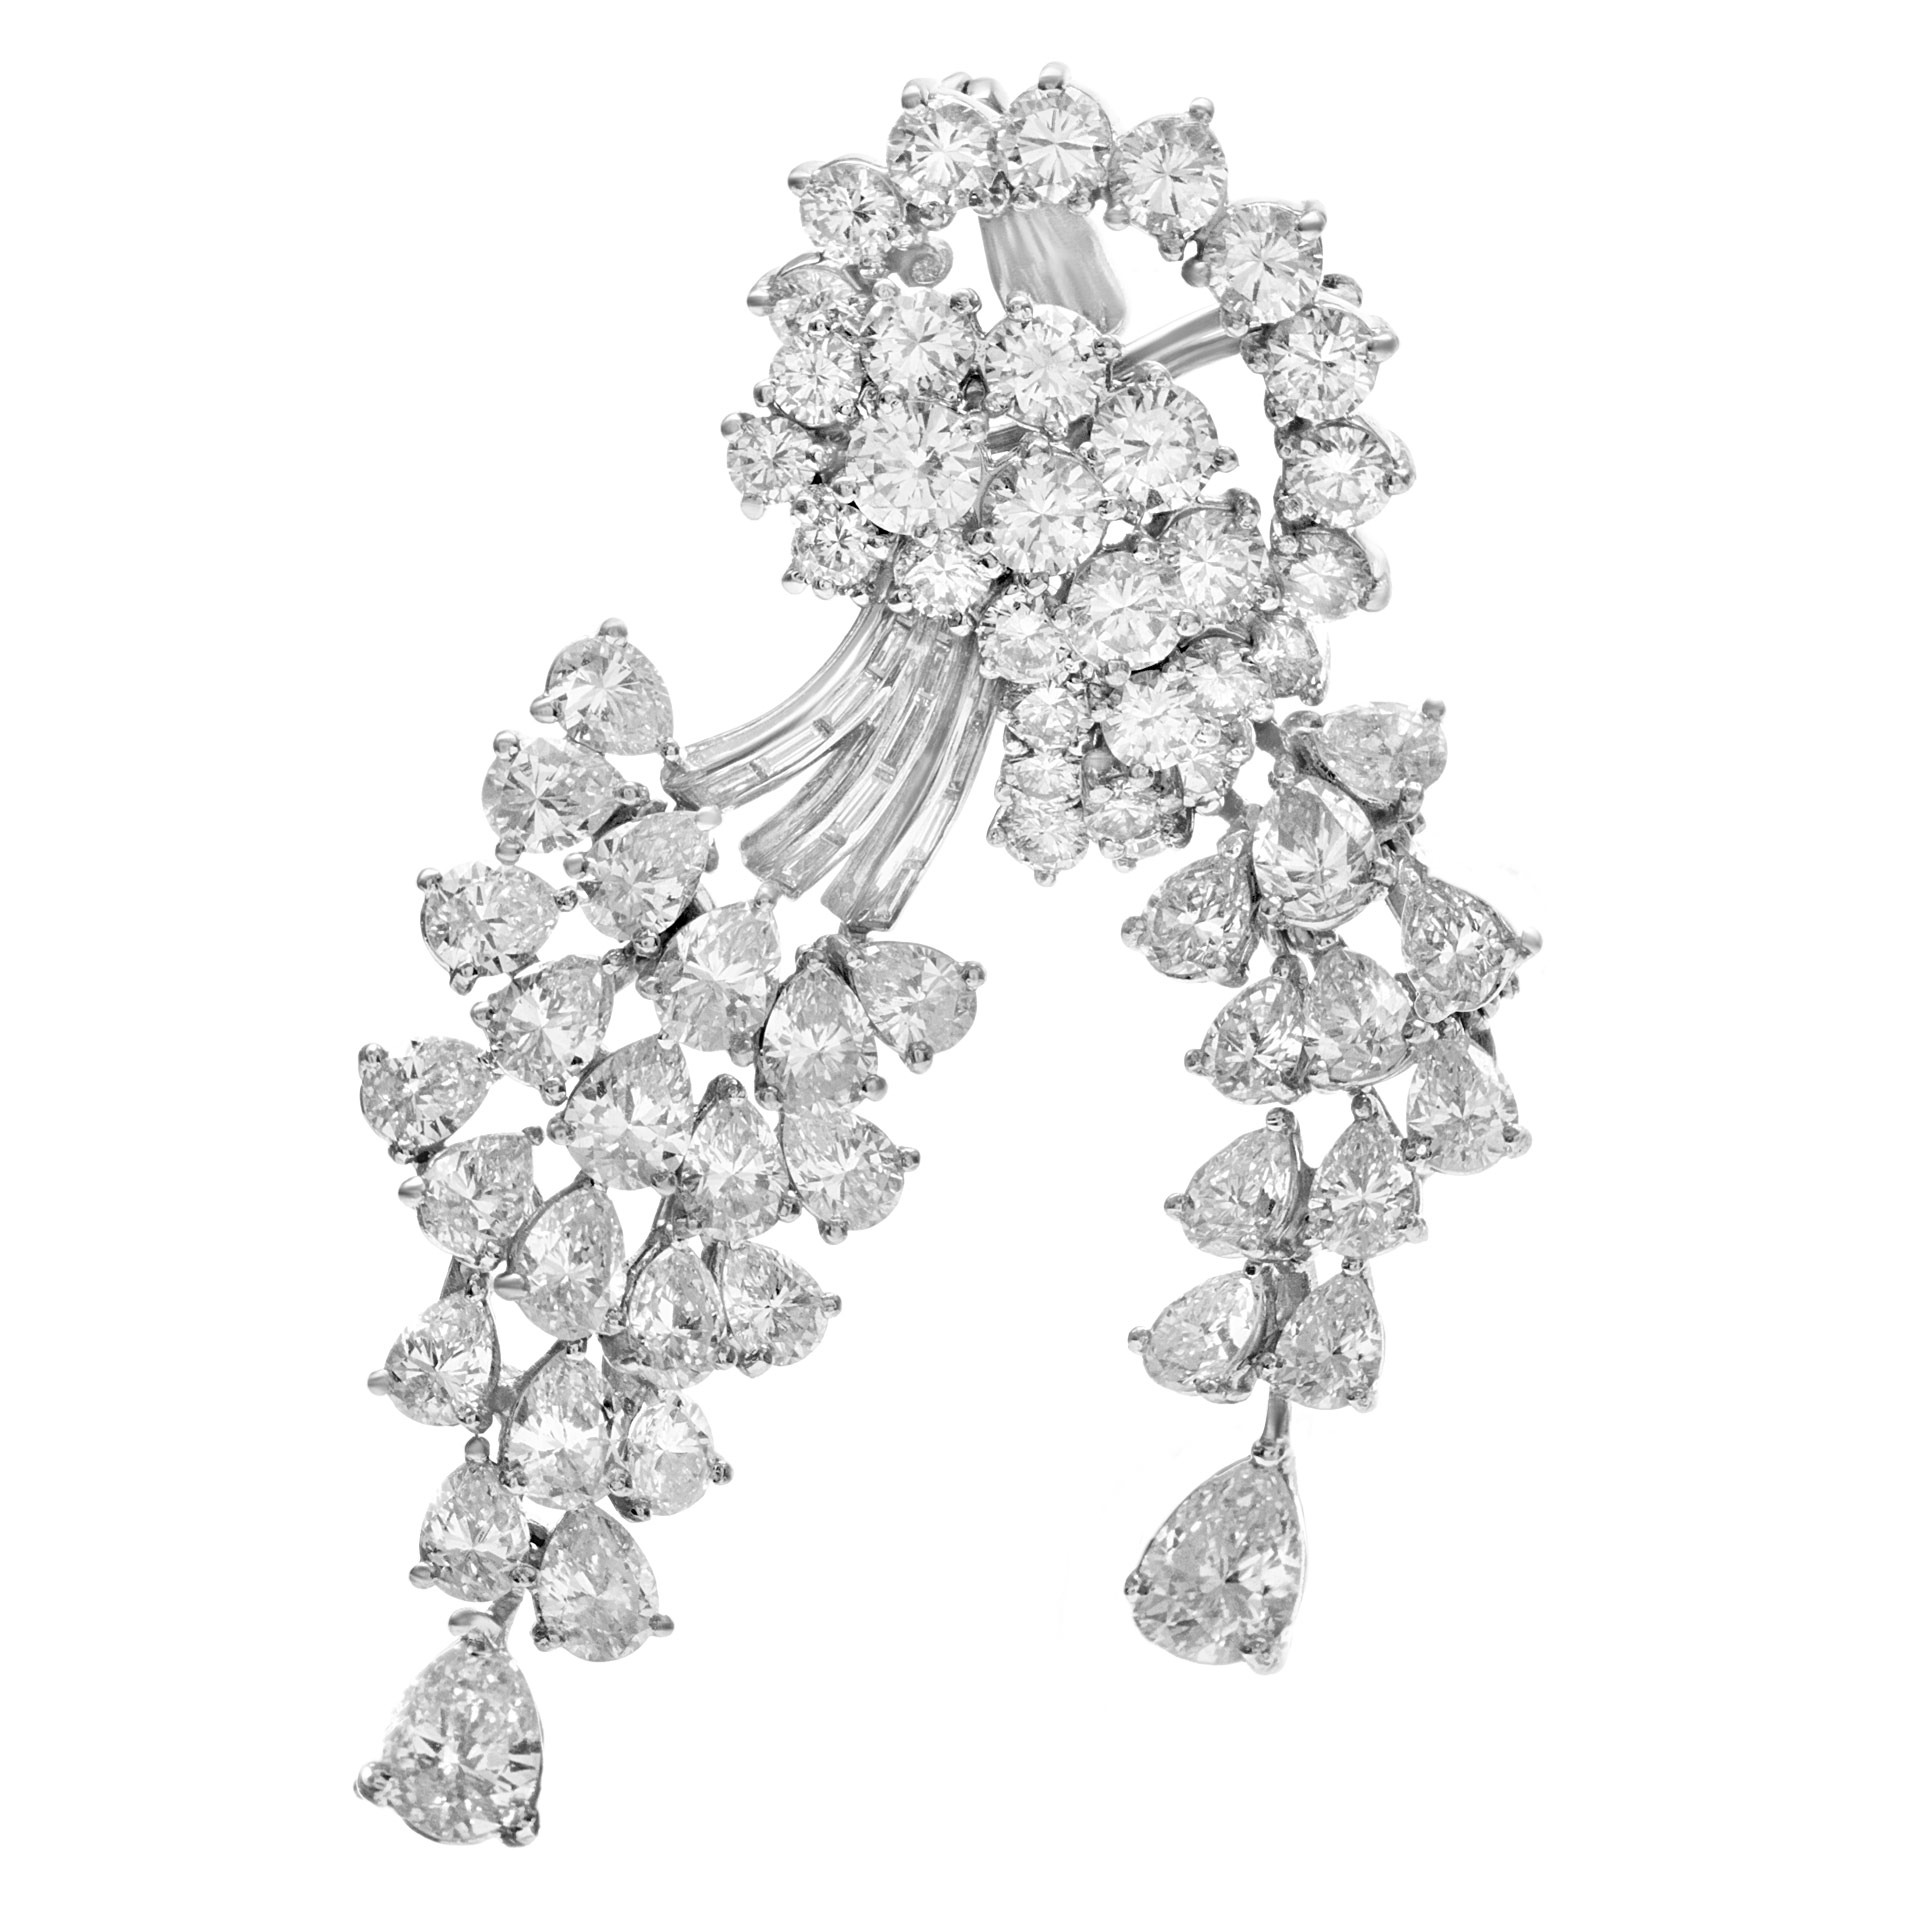 GIA certified Diamond pin with pear, baguett and round shape diamonds w/ a total carat weight of 20.350 image 1